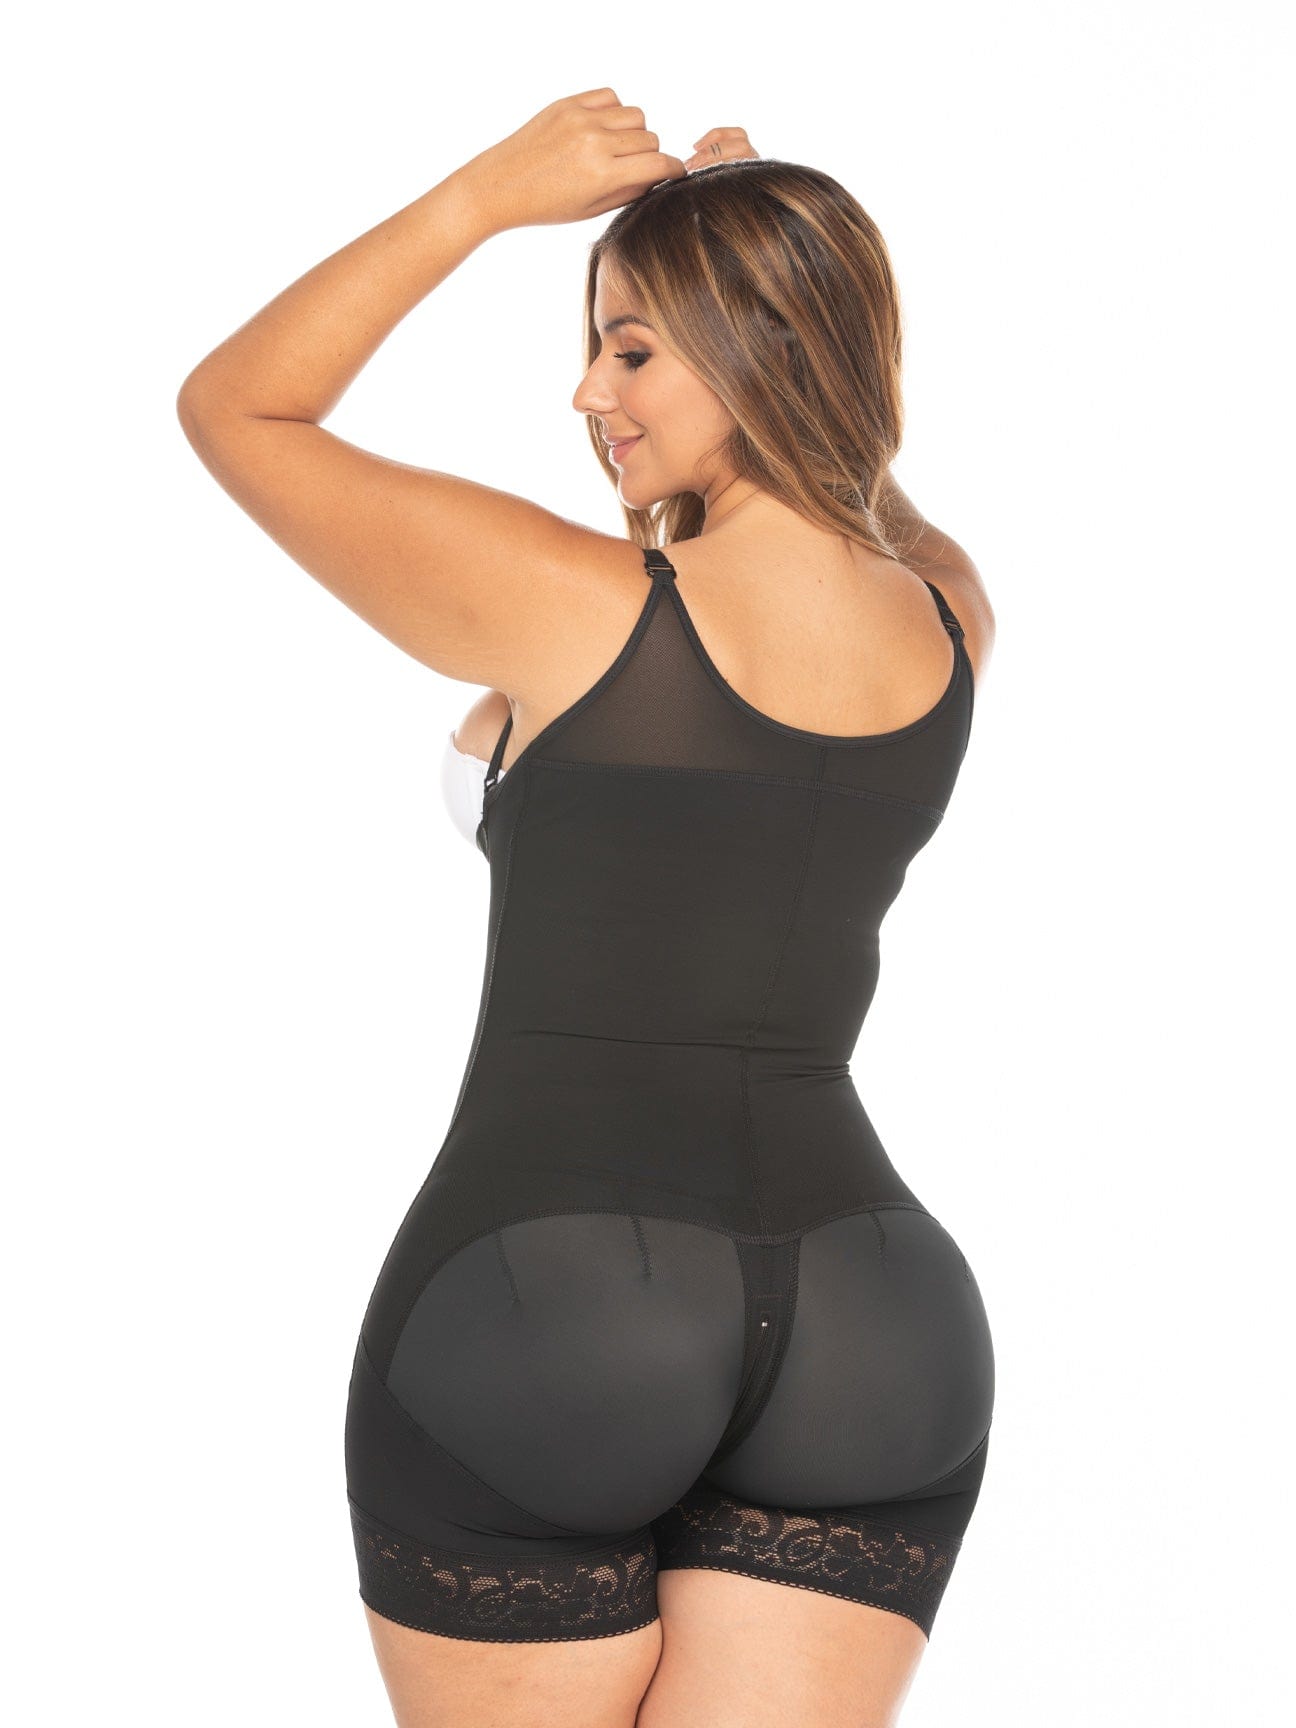 Fresh & Light Premium Colombian Body Shaper for women tummy Strapped Vest  Mold your Waistline Adjustable Straps Belly flattener 3-Row hooks Posture  Corrector Chaleco Fajas Colombianas para mujeres 